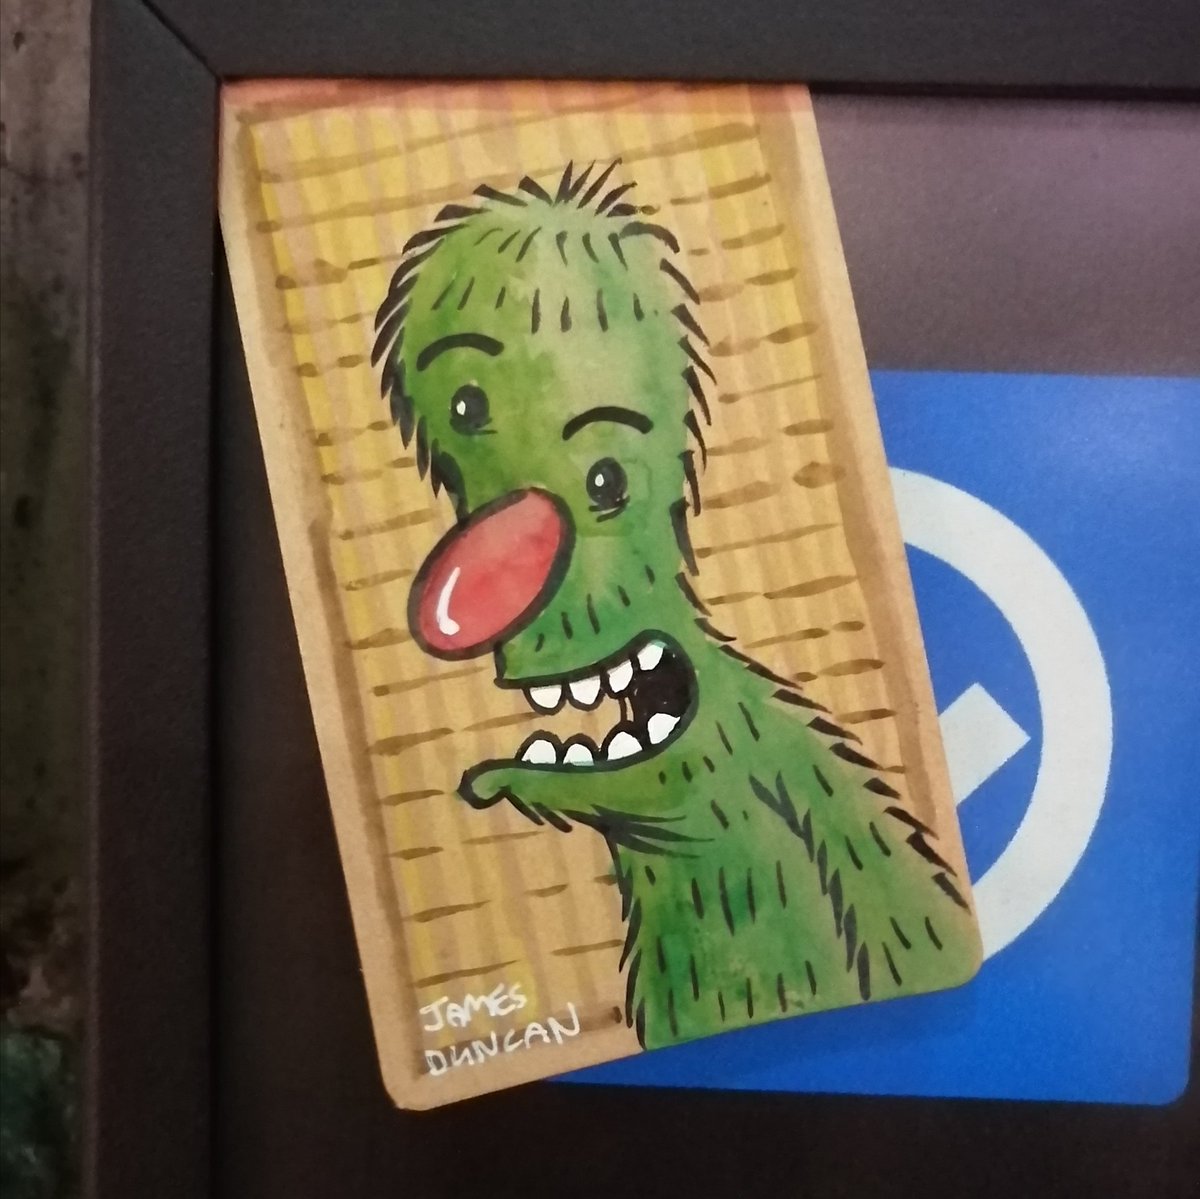 Green guy...red nose!
#leftart #doodle #art #monster
Here's a question... Do people not know how a cell phone works?!?

Holding it in front of you with it on speaker, so you can shout to the other person, & we can listen to the entire call.
WTF? It's a phone not a walkie-talkie!!